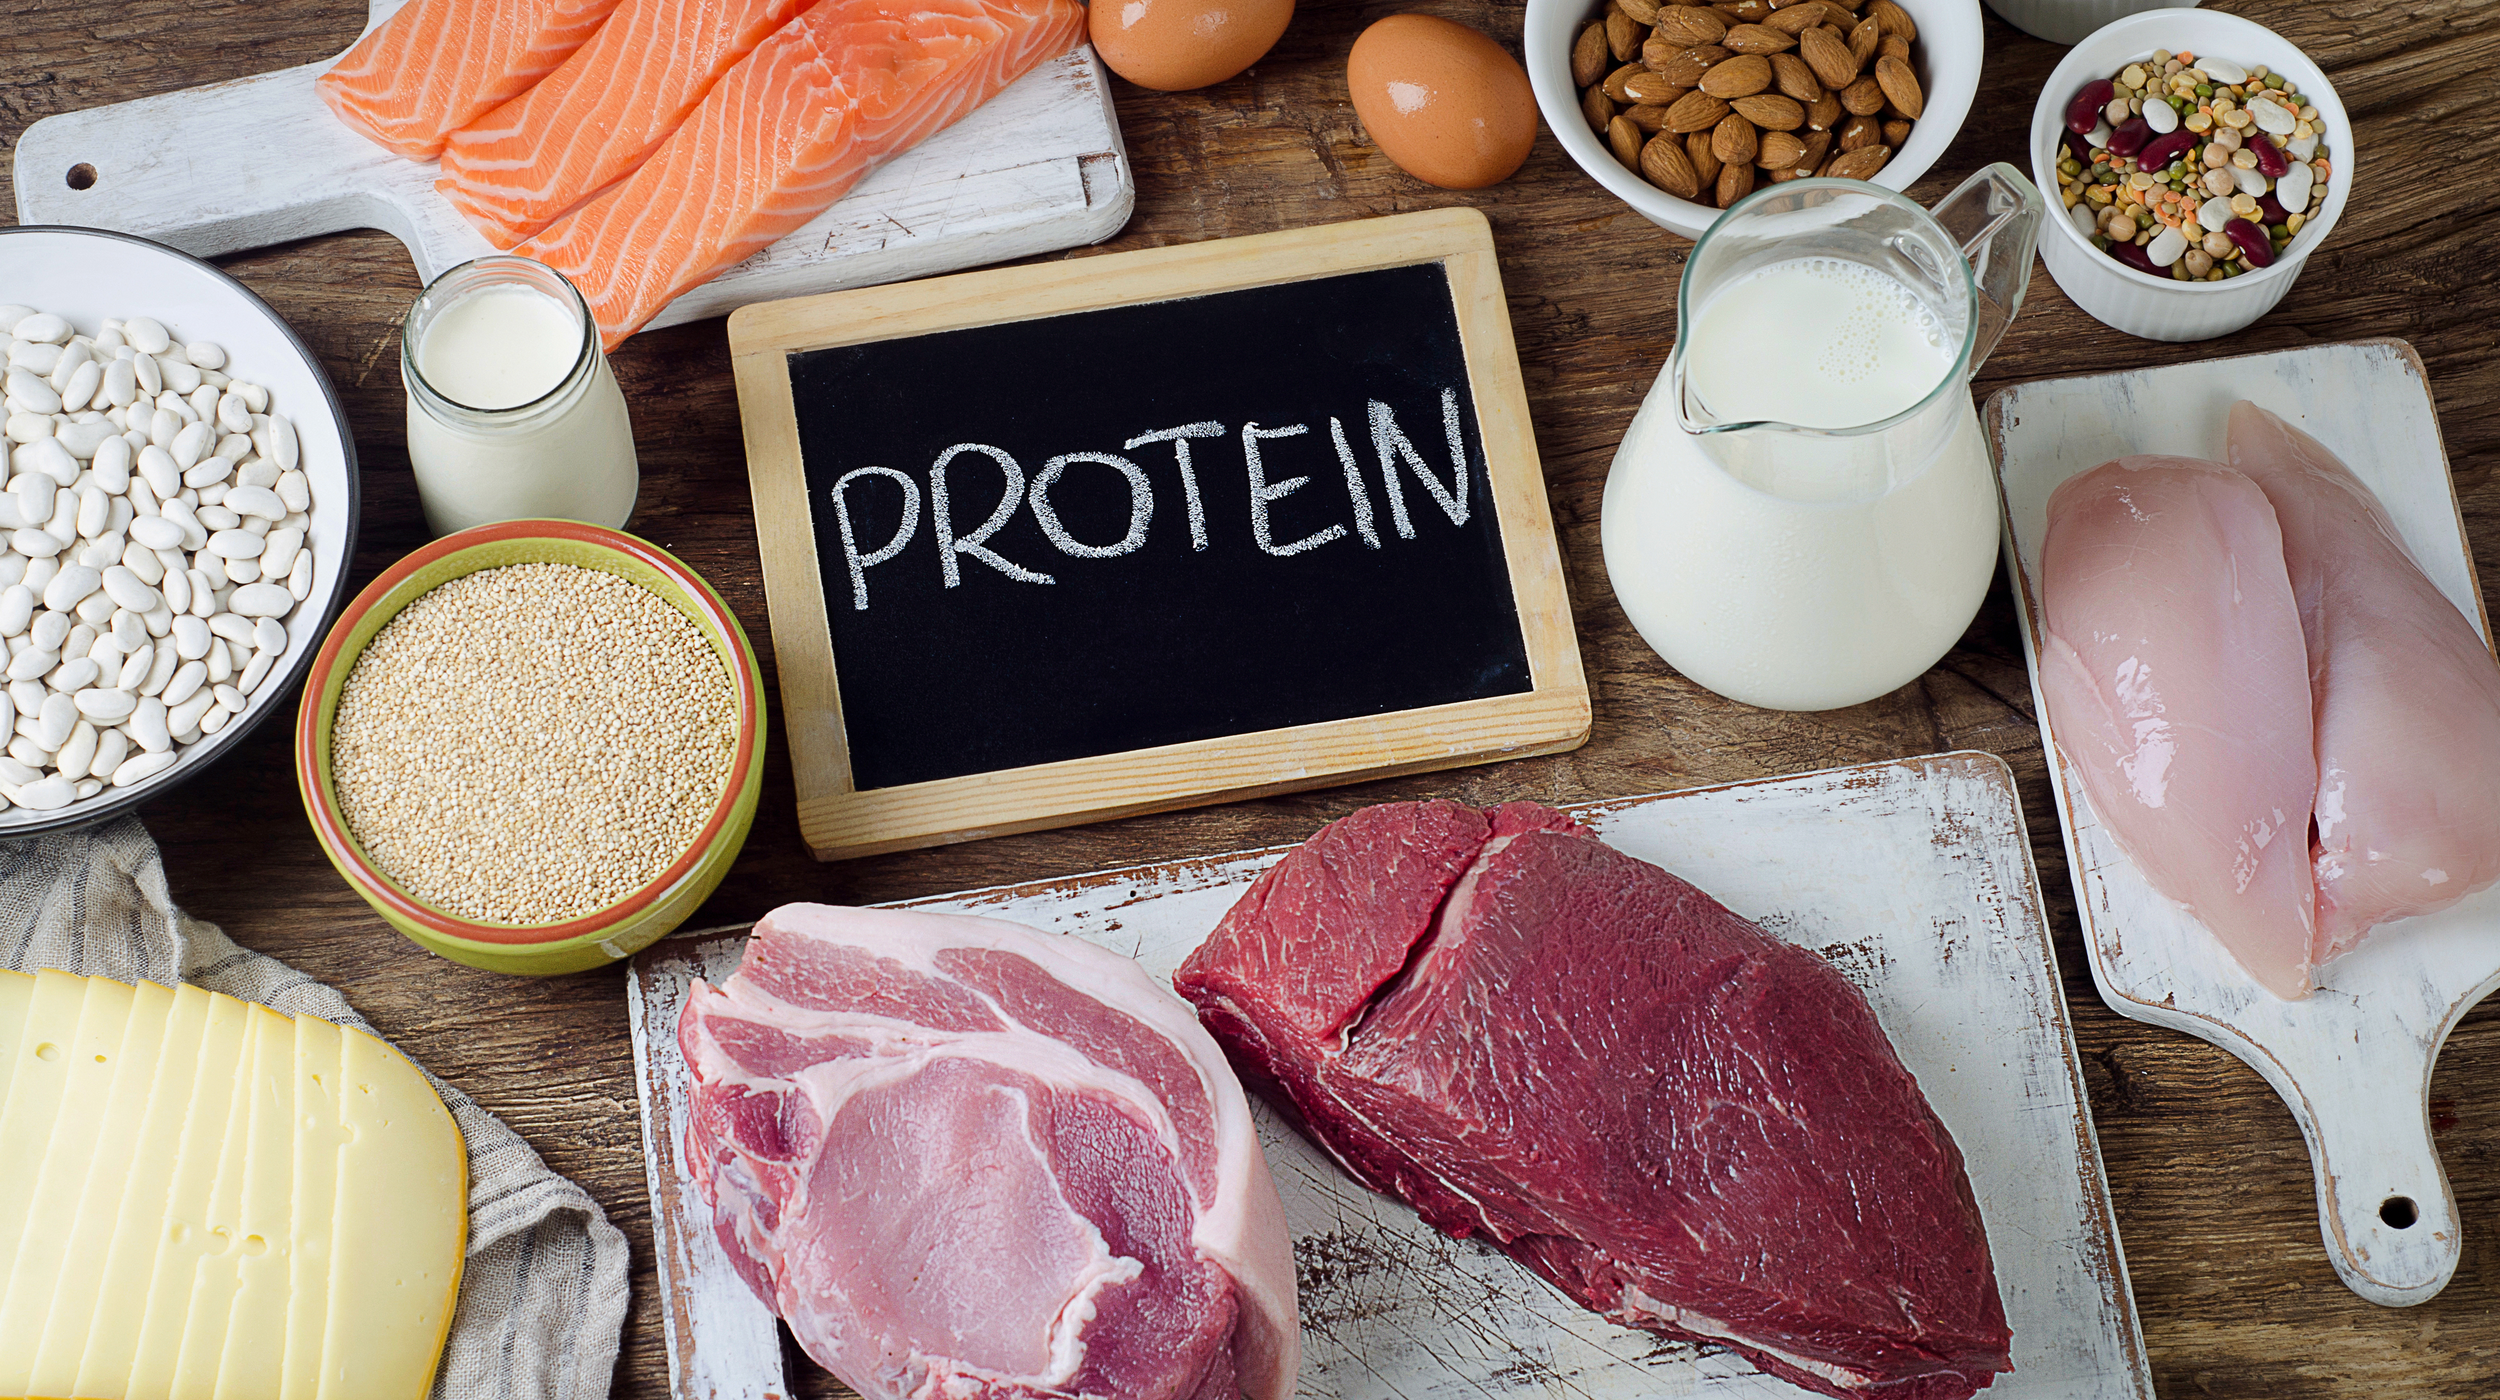 Why do we Need Protein?